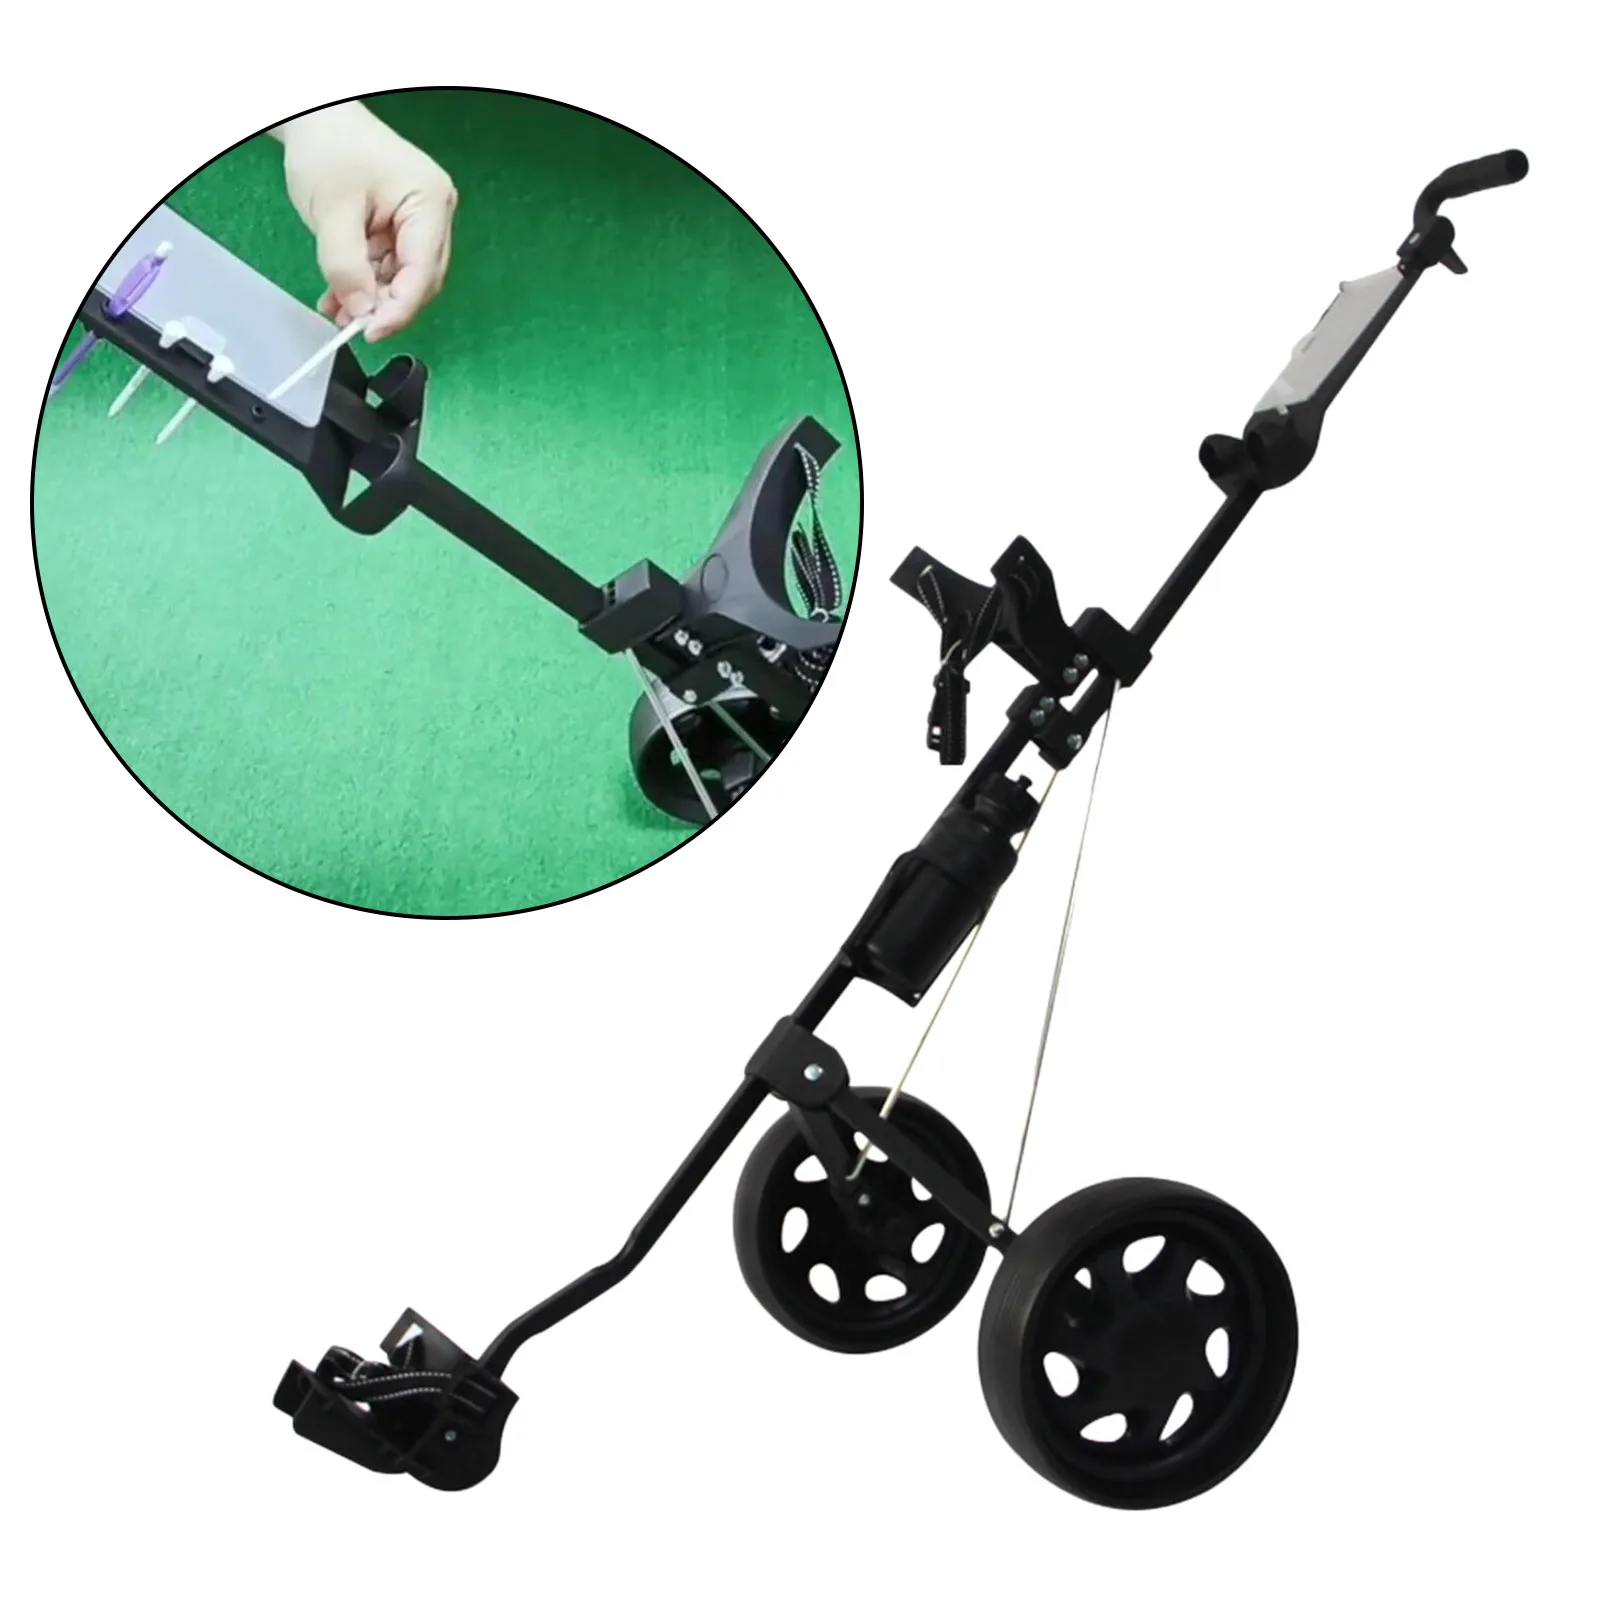 Wheel Golf Push Pull Cart Folding Trolley Carry Golf Pack Holder Accessories